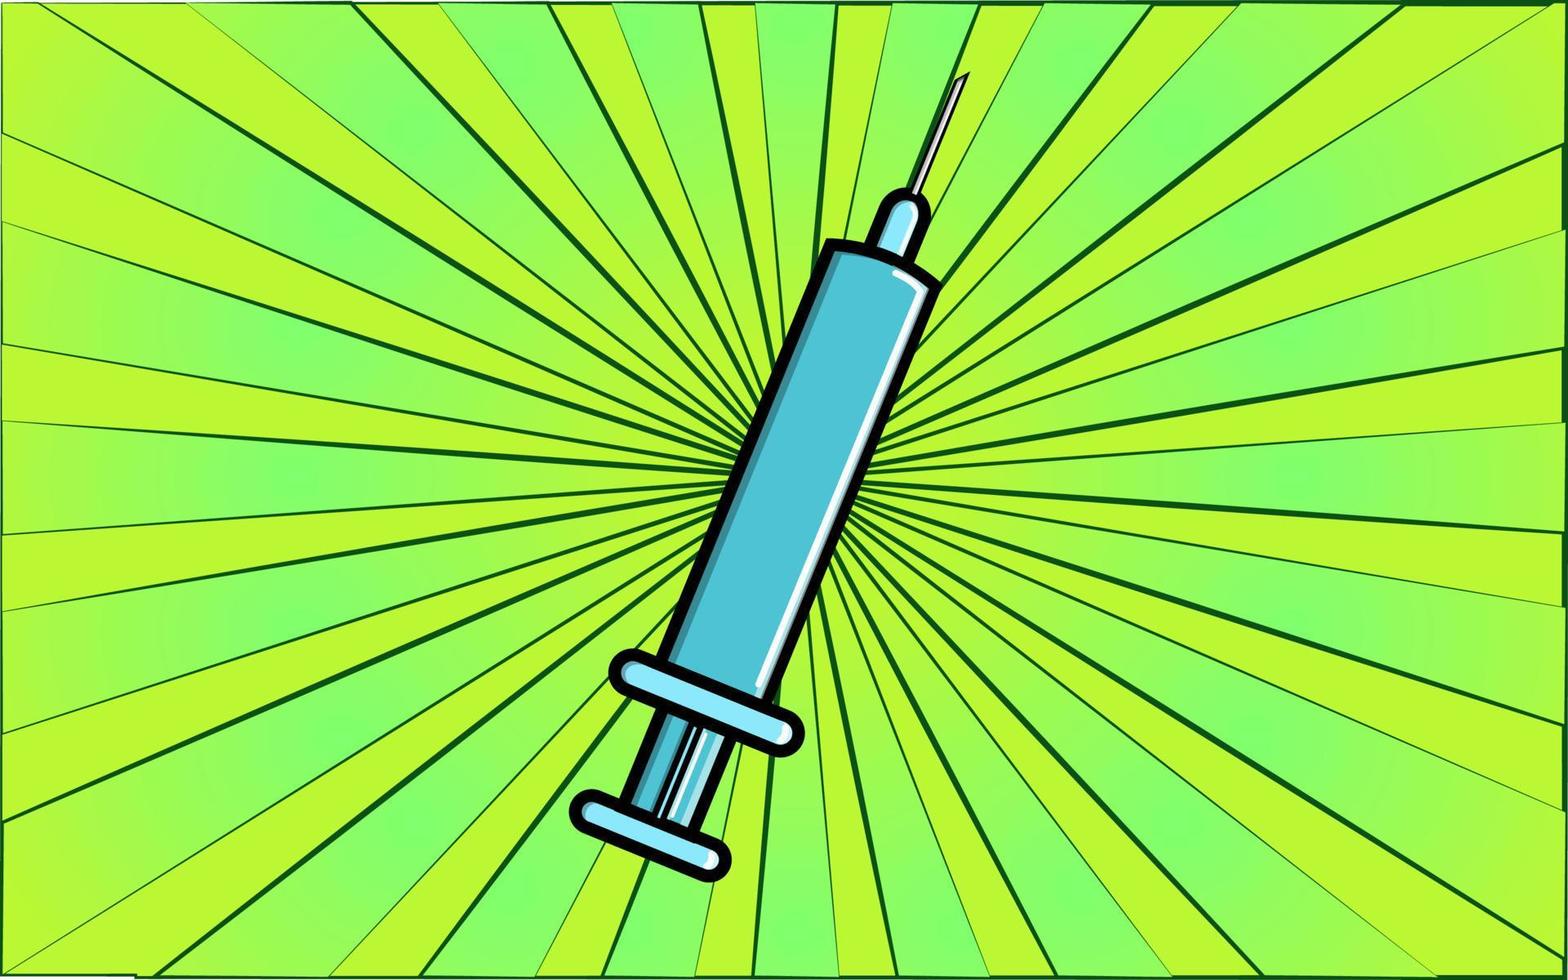 Medical pharmacological healing sterile disposable plastic syringe for injection and health care on a background of abstract green rays. Vector illustration